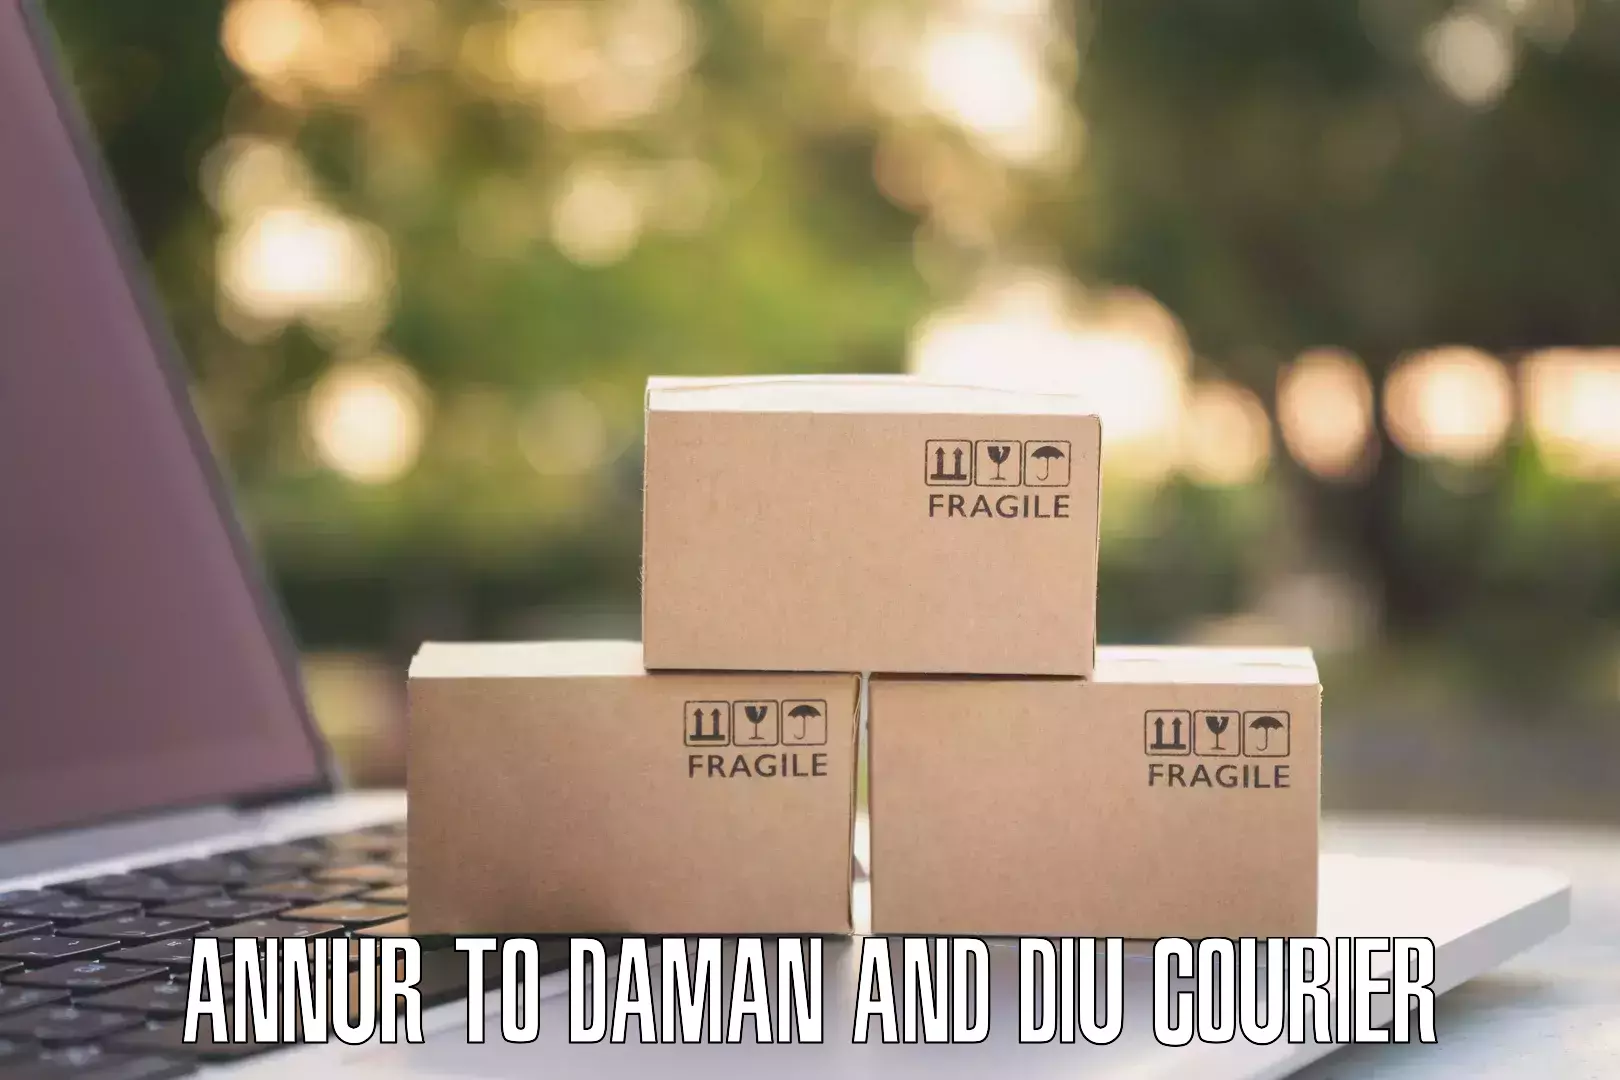 On-demand shipping options Annur to Daman and Diu